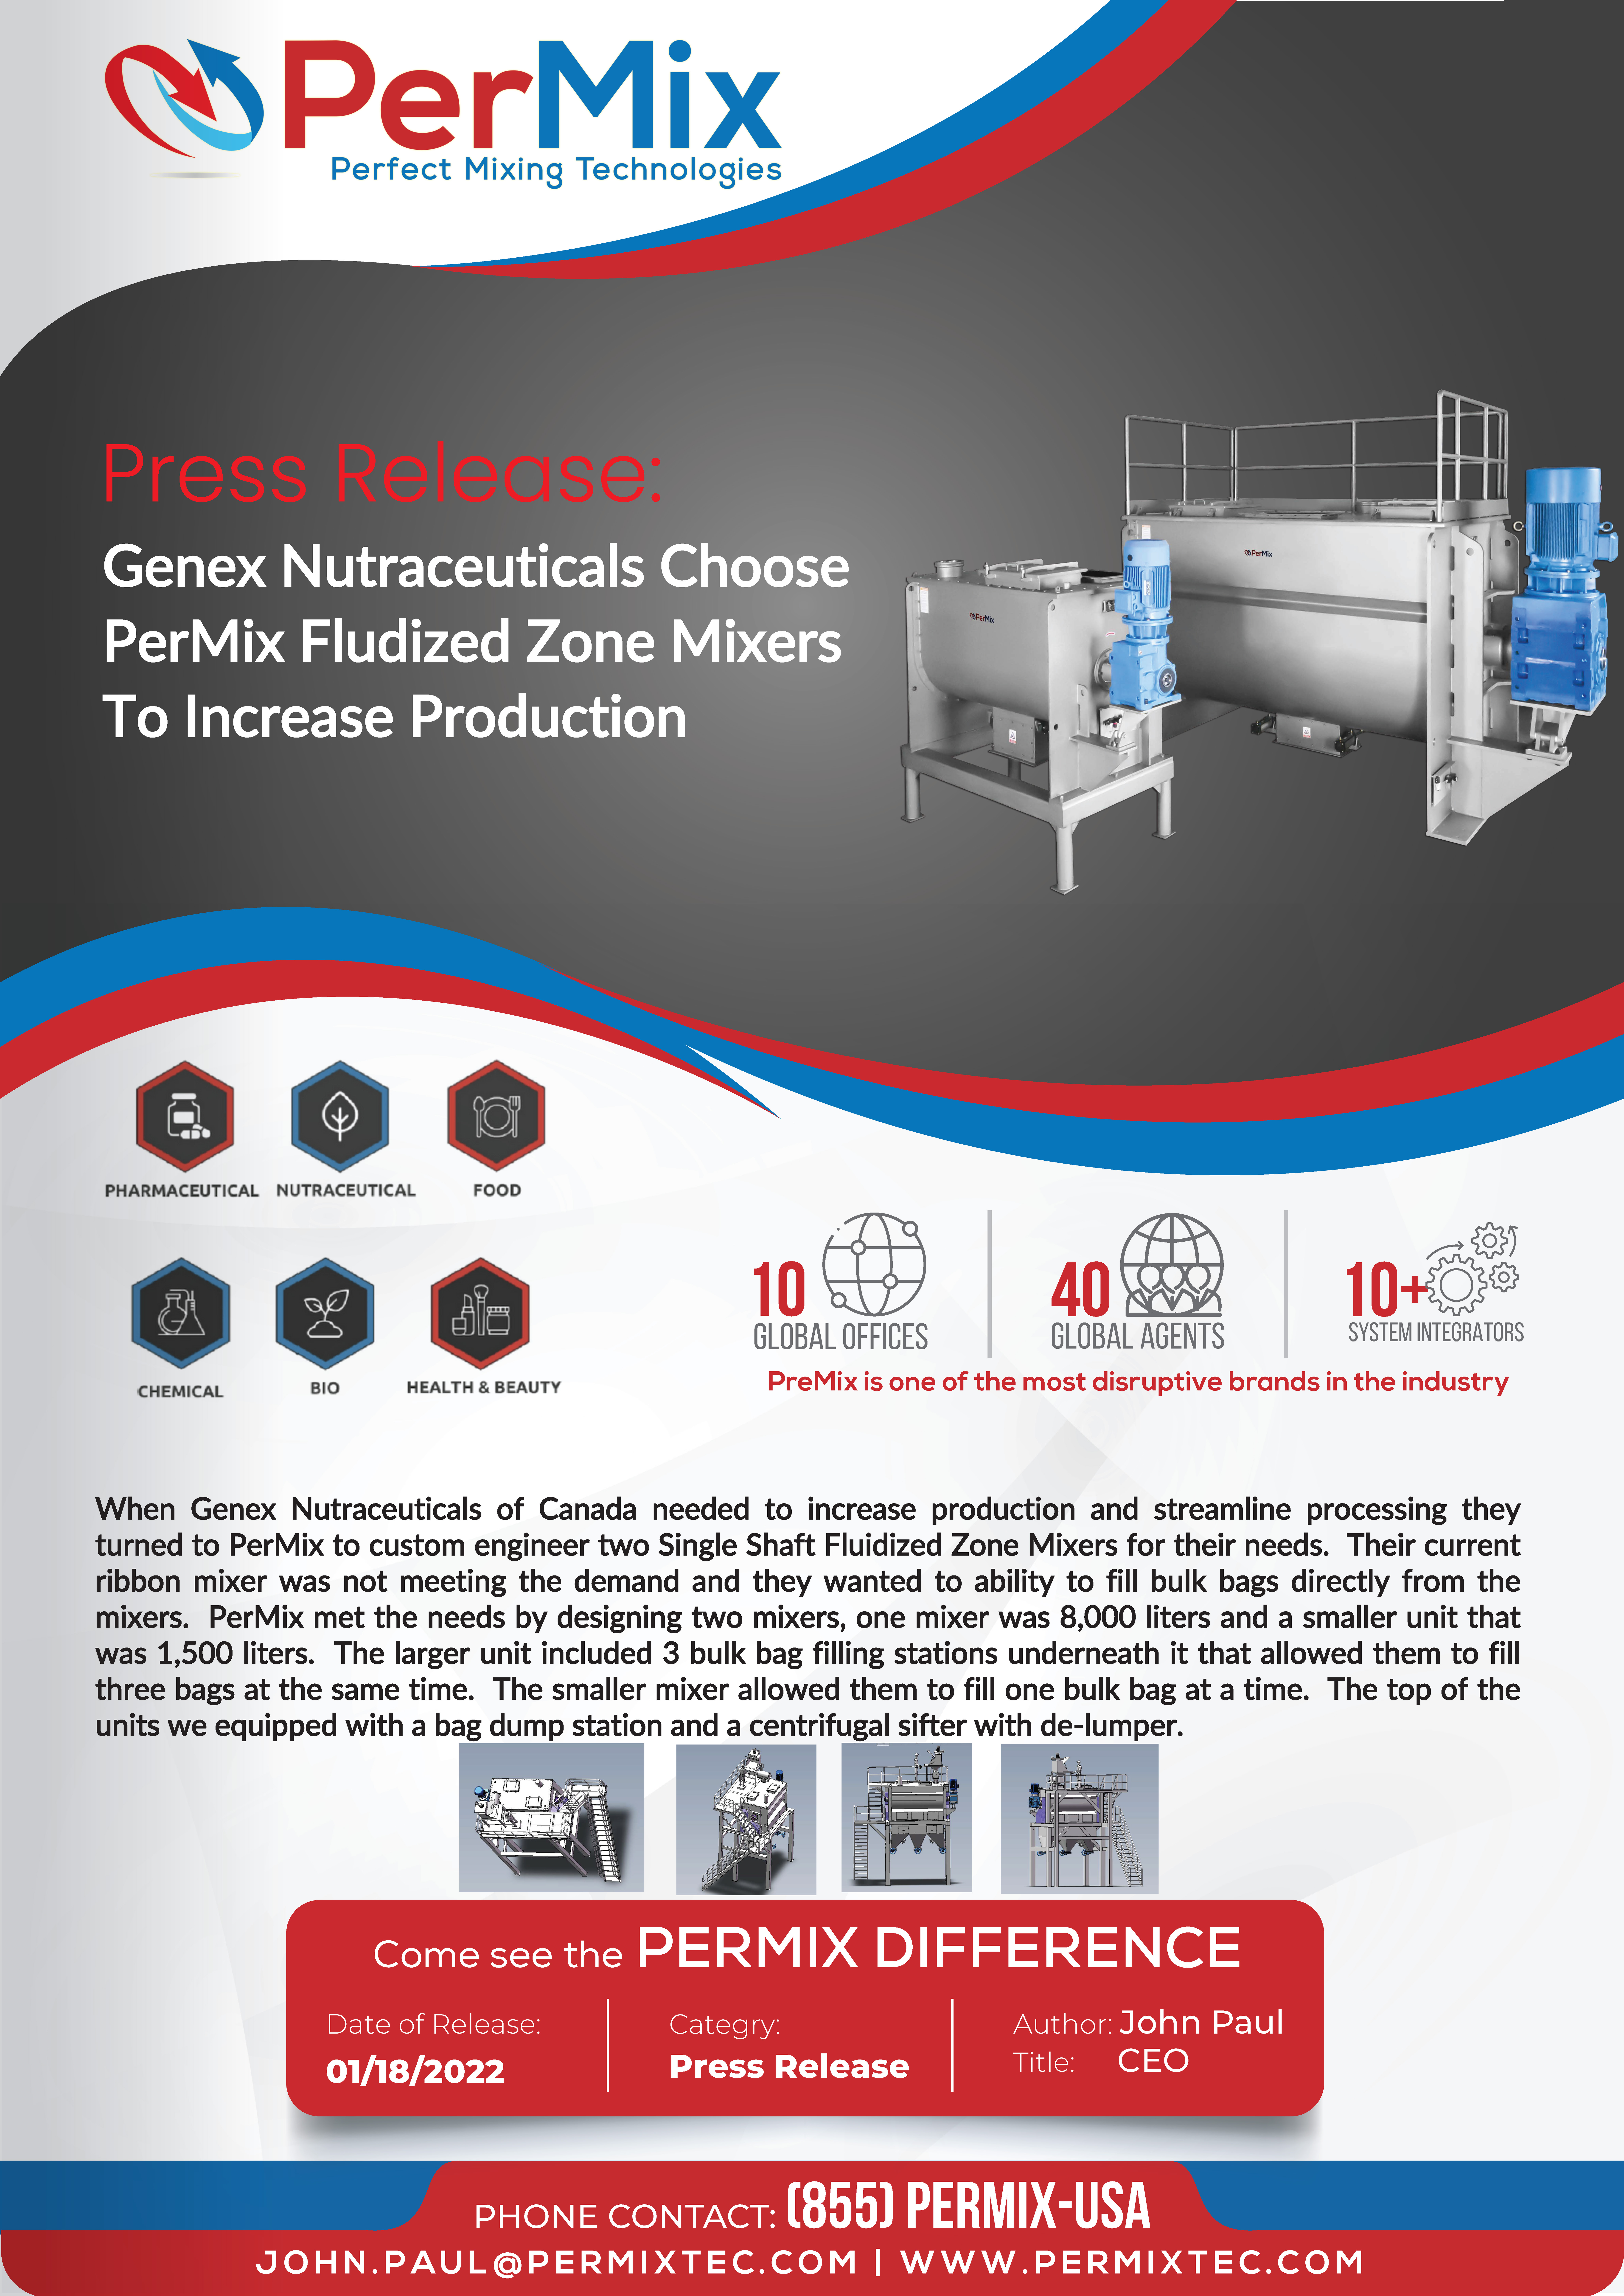 Genex Nutraceuticals Choose PerMix Fludized Zone Mixers To Increase Production